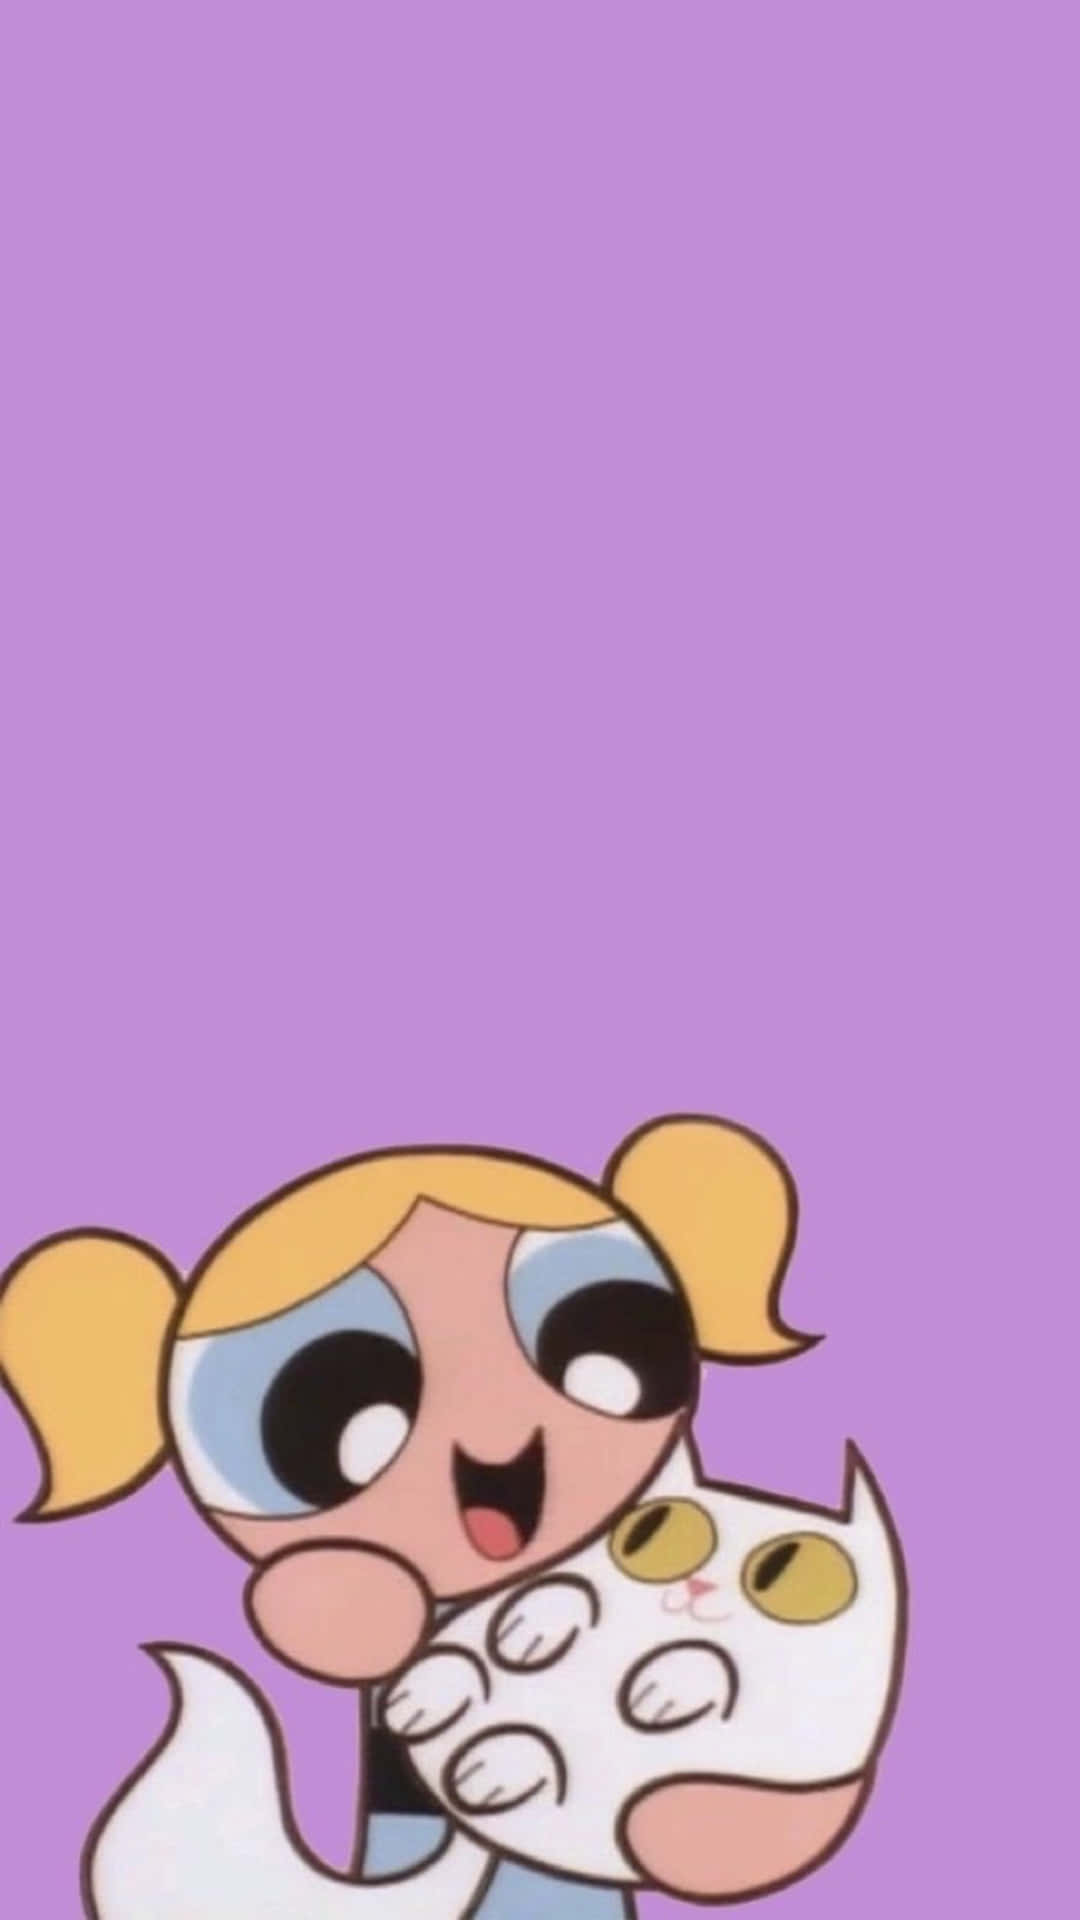 Bubbles, the kindhearted heroine of the Powerpuff Girls Wallpaper